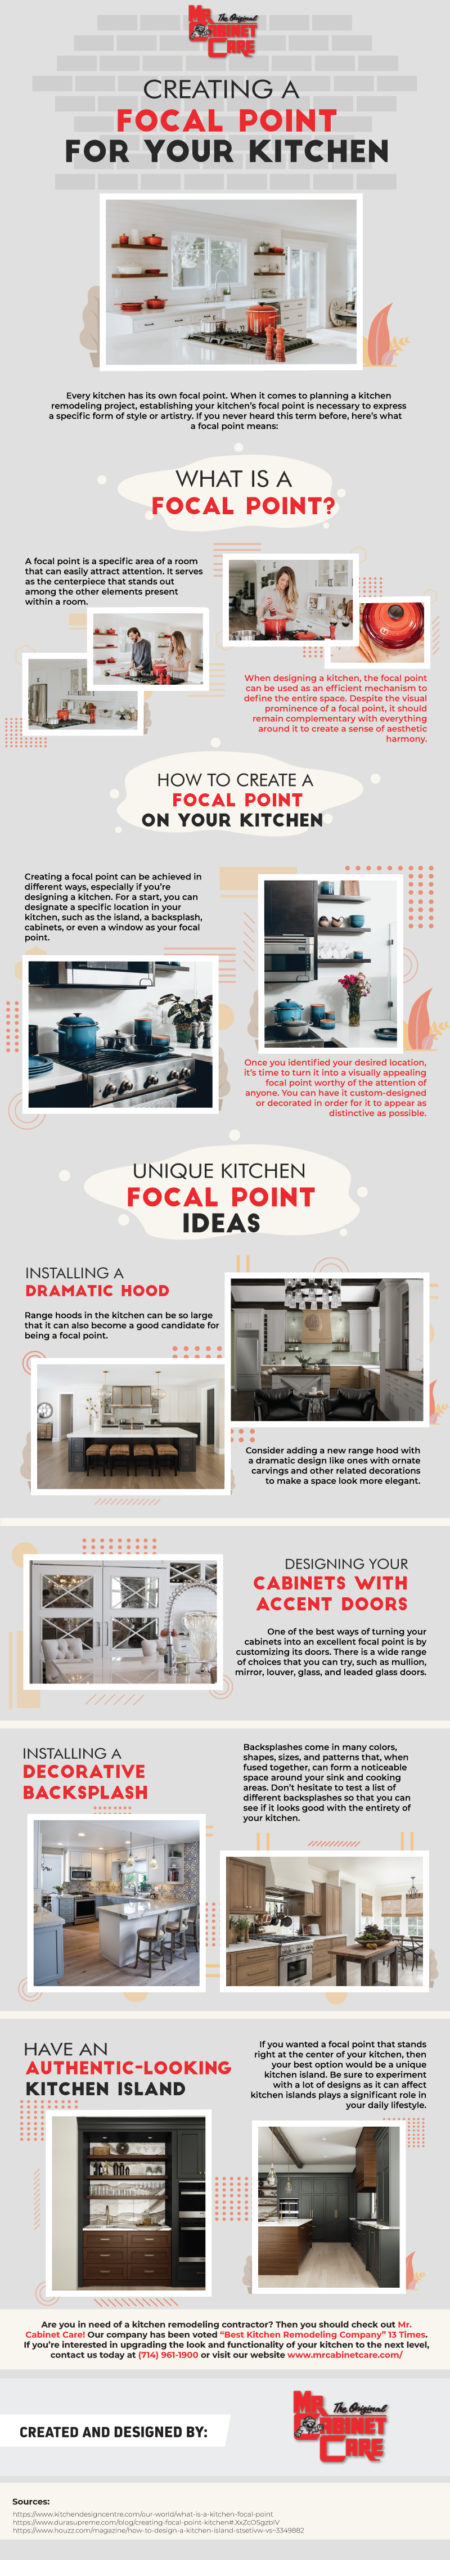 Creating a Focal Point for your Kitchen